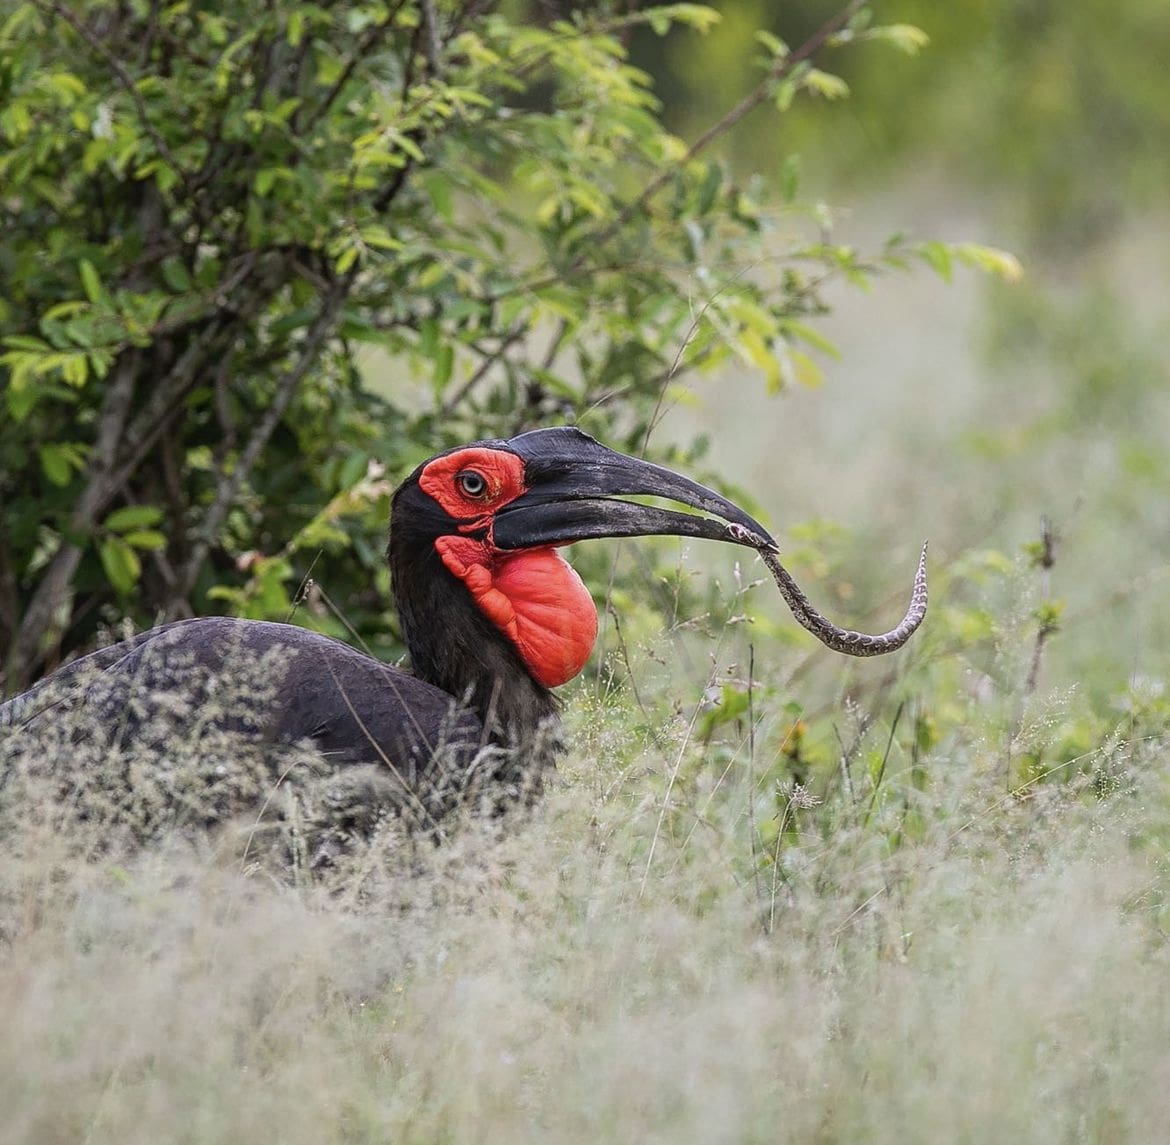 Southern Ground Hornbill feeding on a young Puff Adder